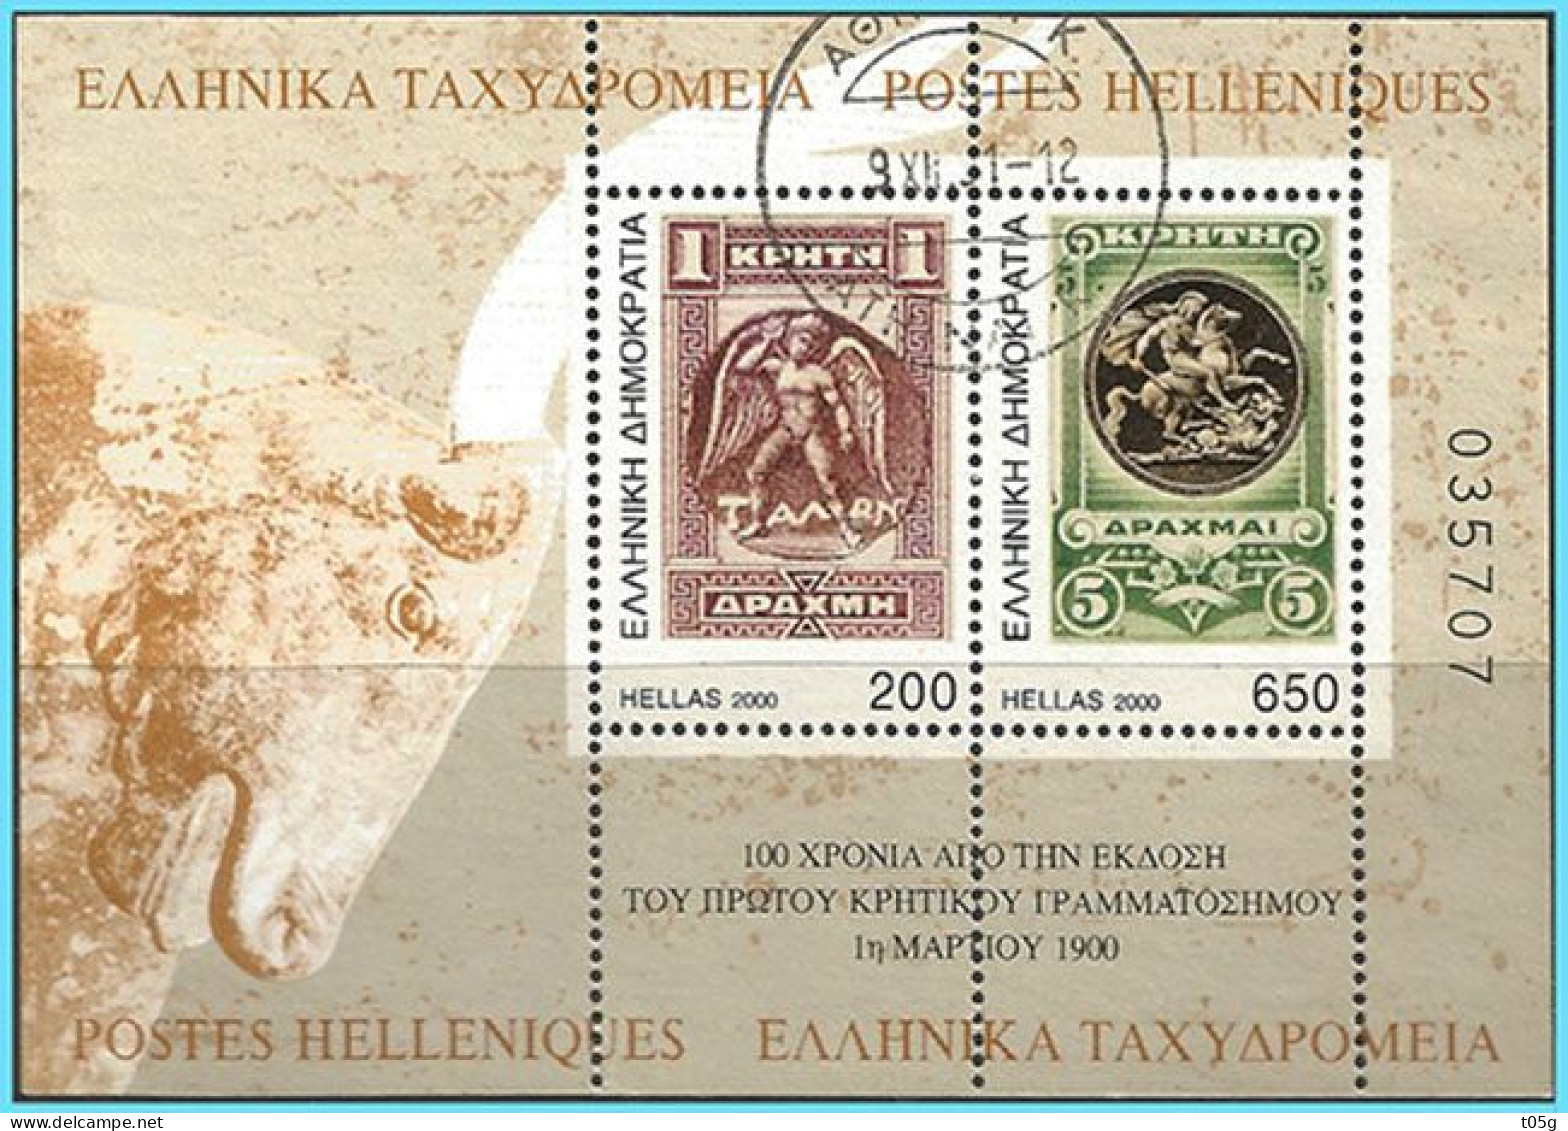 GREECE- GRECE- HELLAS 2000:  The Stamps Of Crete Miniature Sheet Used - Usados